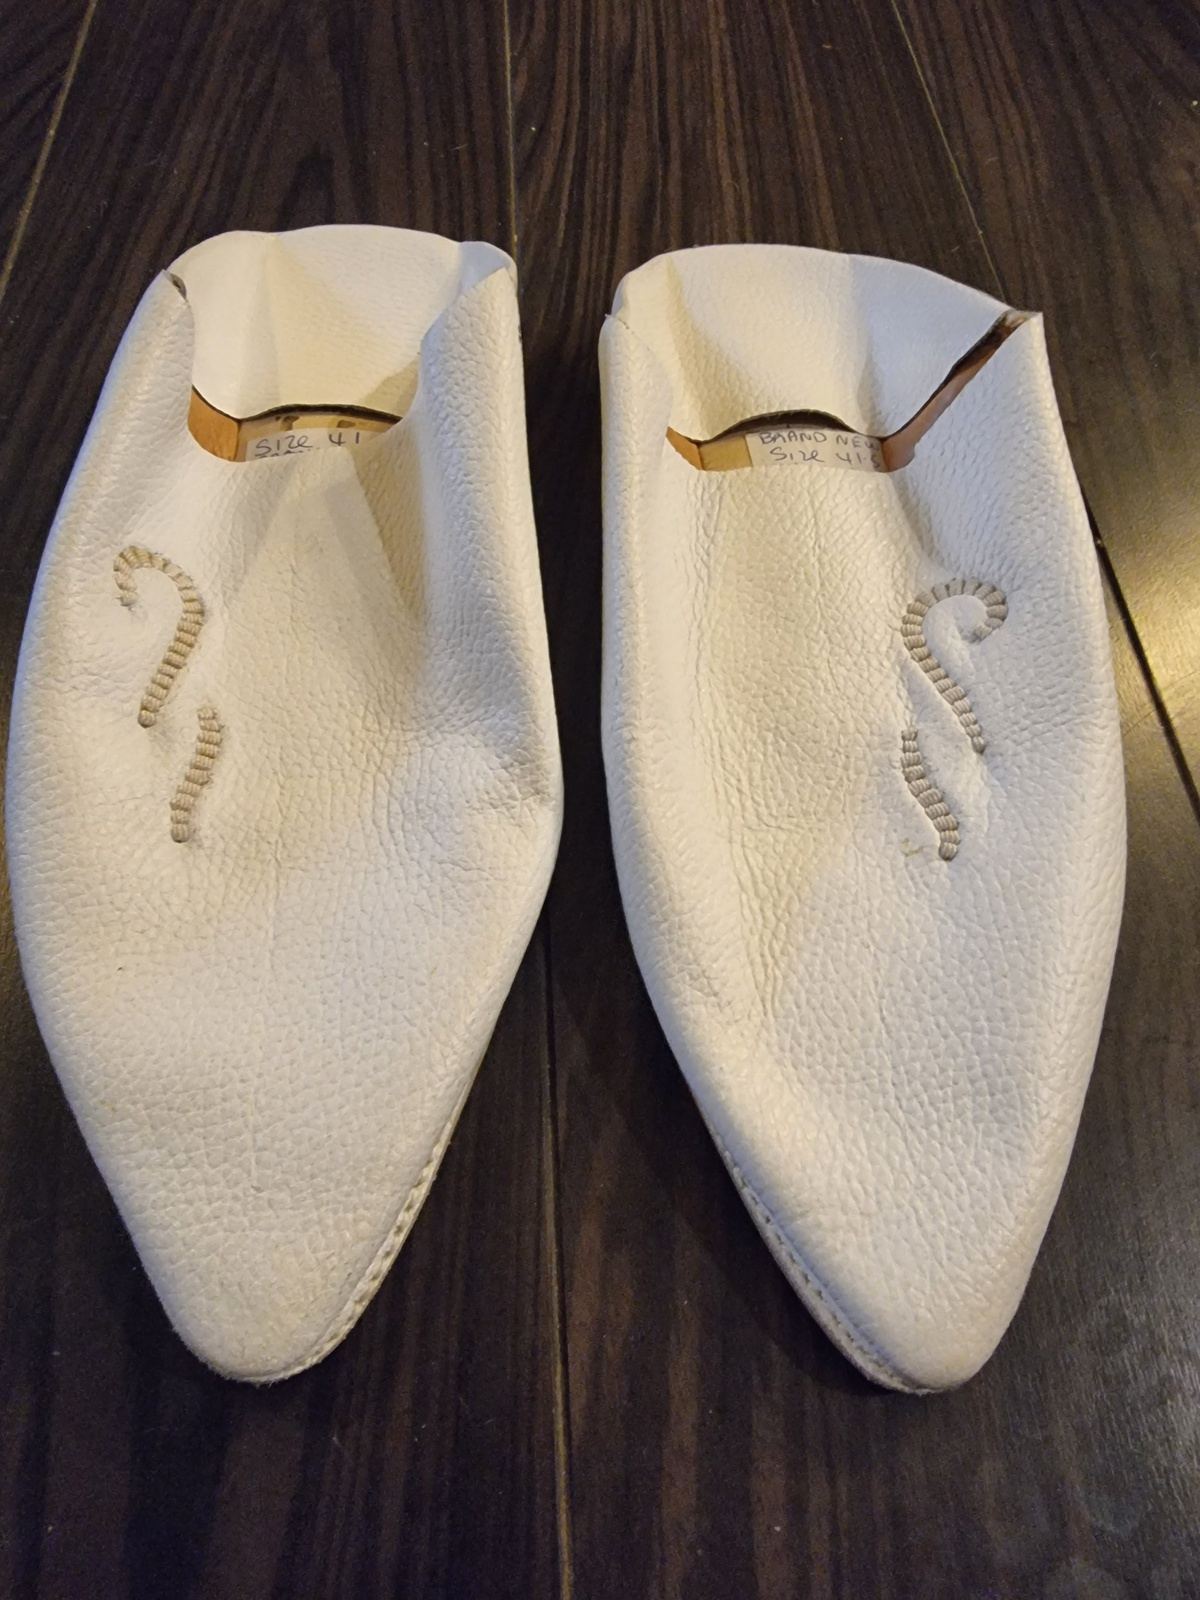 Vintage Babouo Slip On Shoes